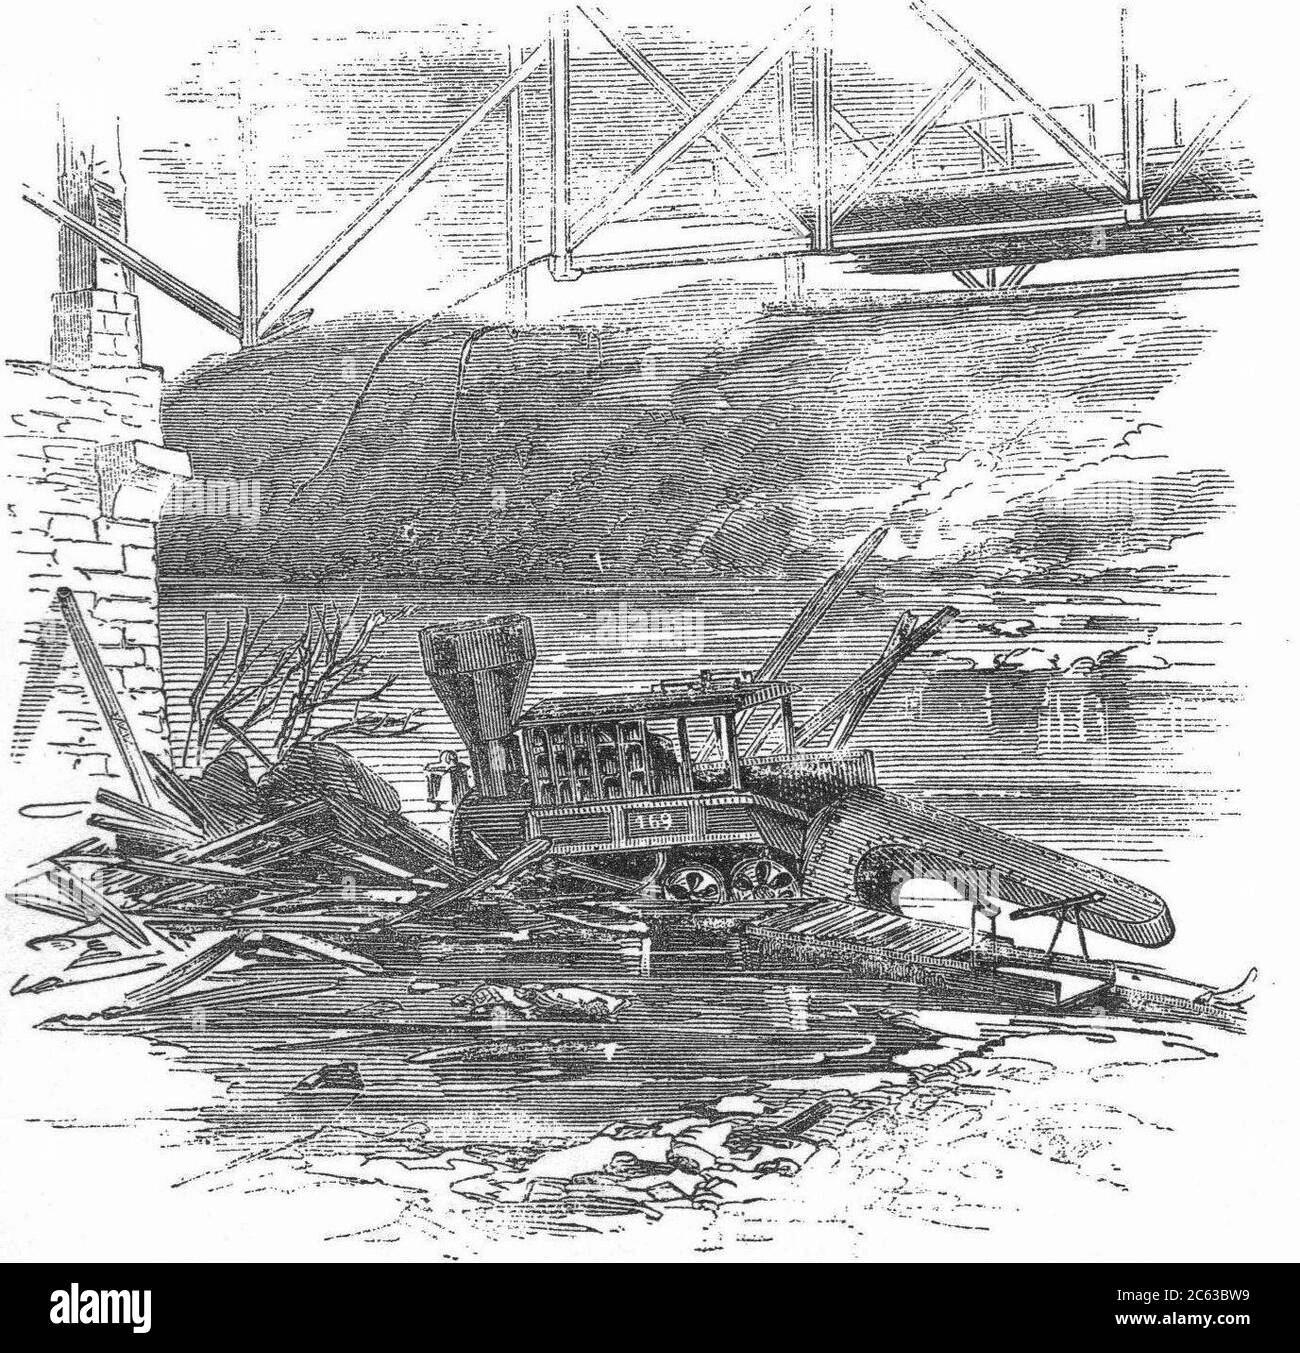 Locomotive and tender thrown from the railway bridge at Harper's Ferry by the rebels - John Brown's Raid Stock Photo